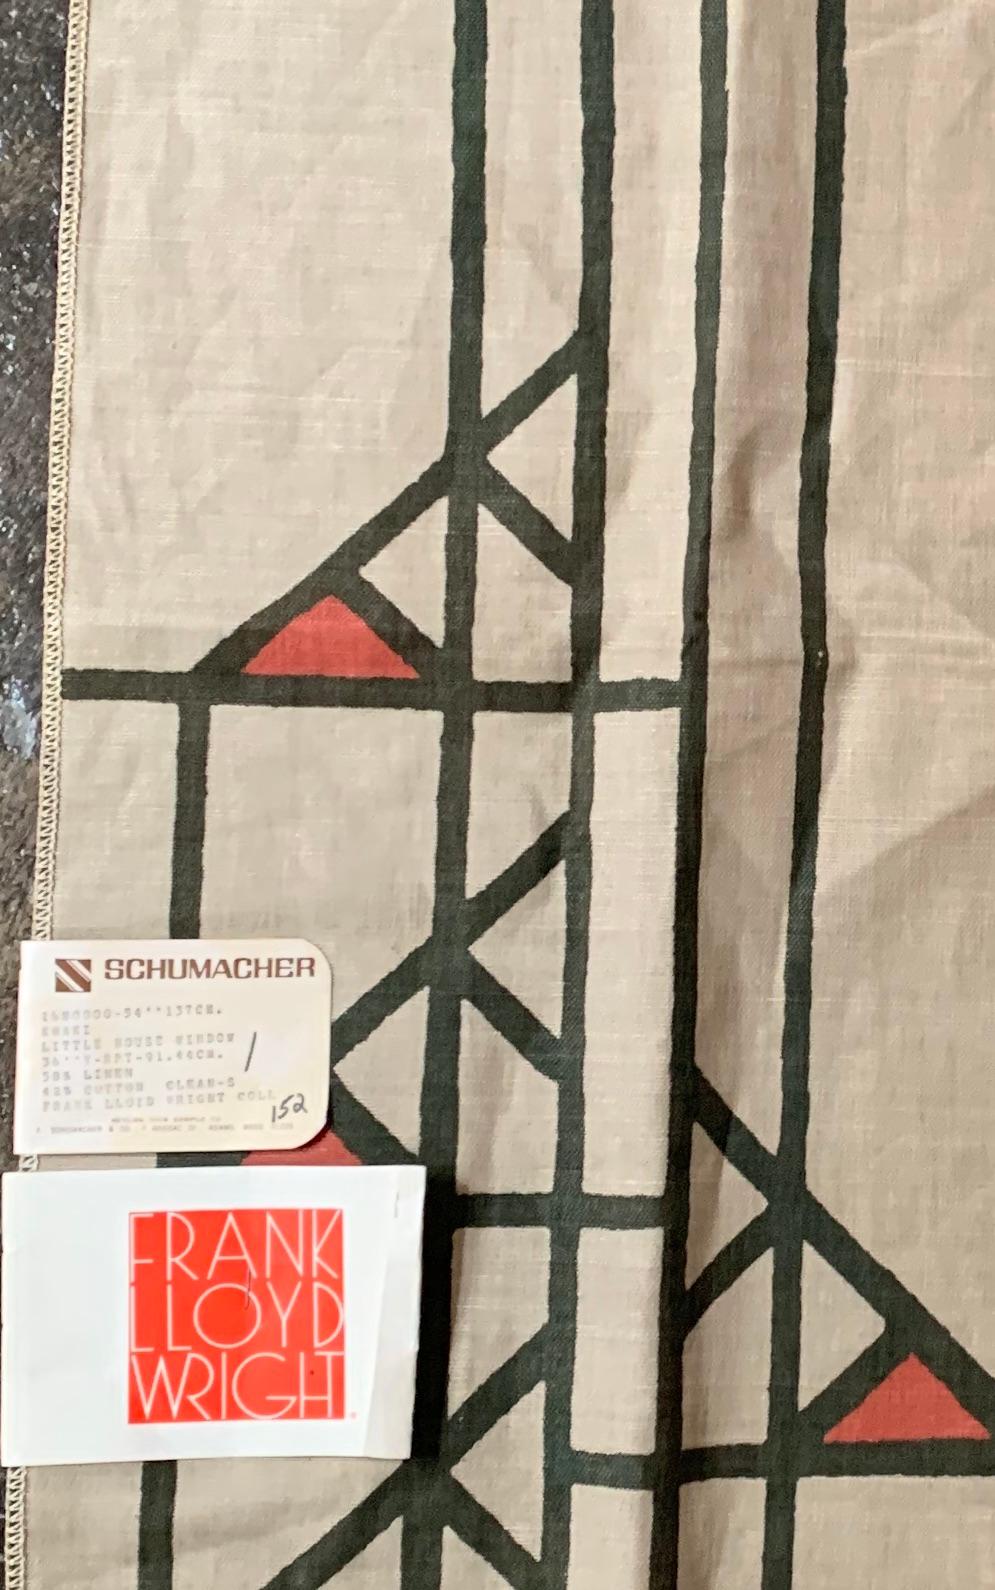 Large panel swatch dating to frank Lloyd wright’s original 1955 collection for Schumacher. Extremely rare original large-scale fabric, with surged edges to facilitate long term display and handling non its own, ostensibly in an interior design